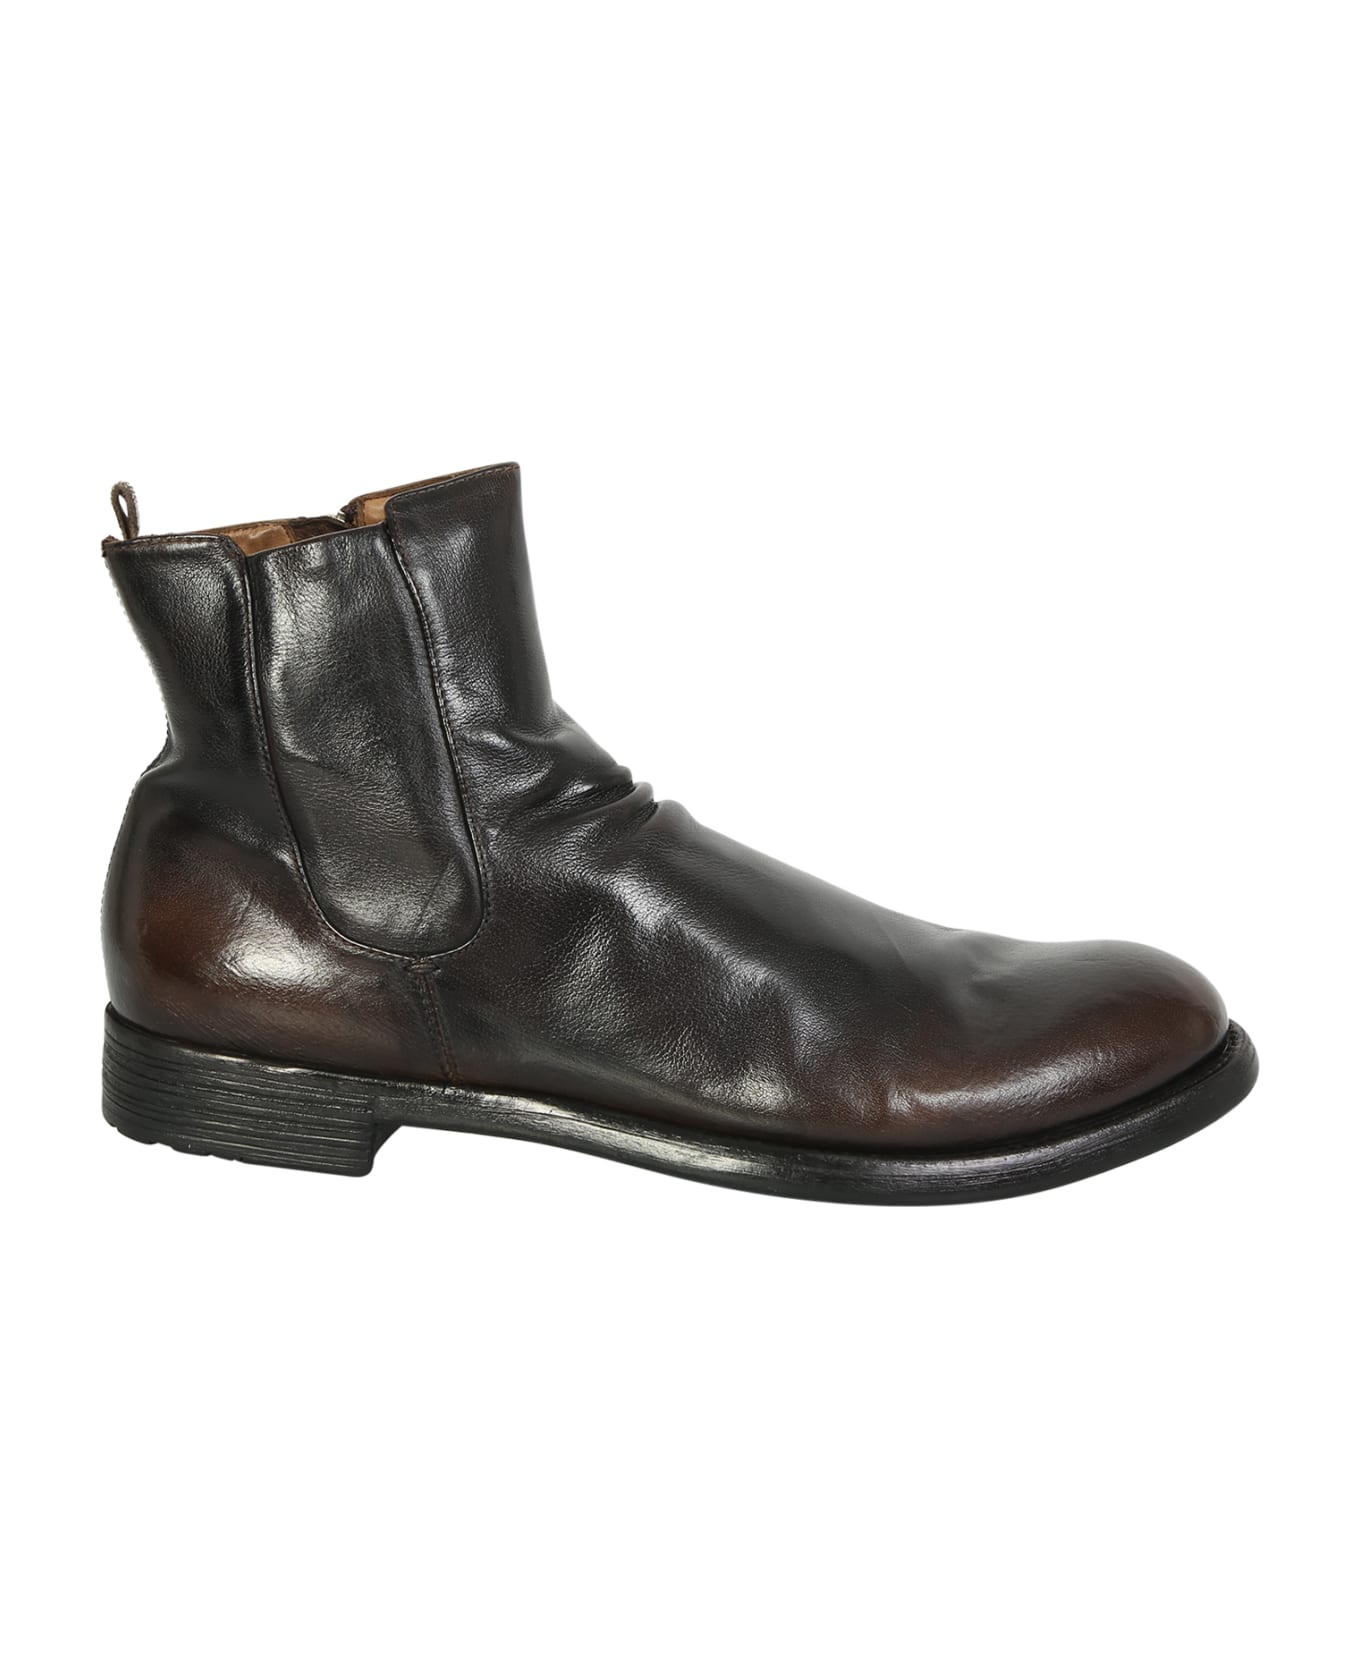 Officine Creative Hive Ankle Boots - Brown